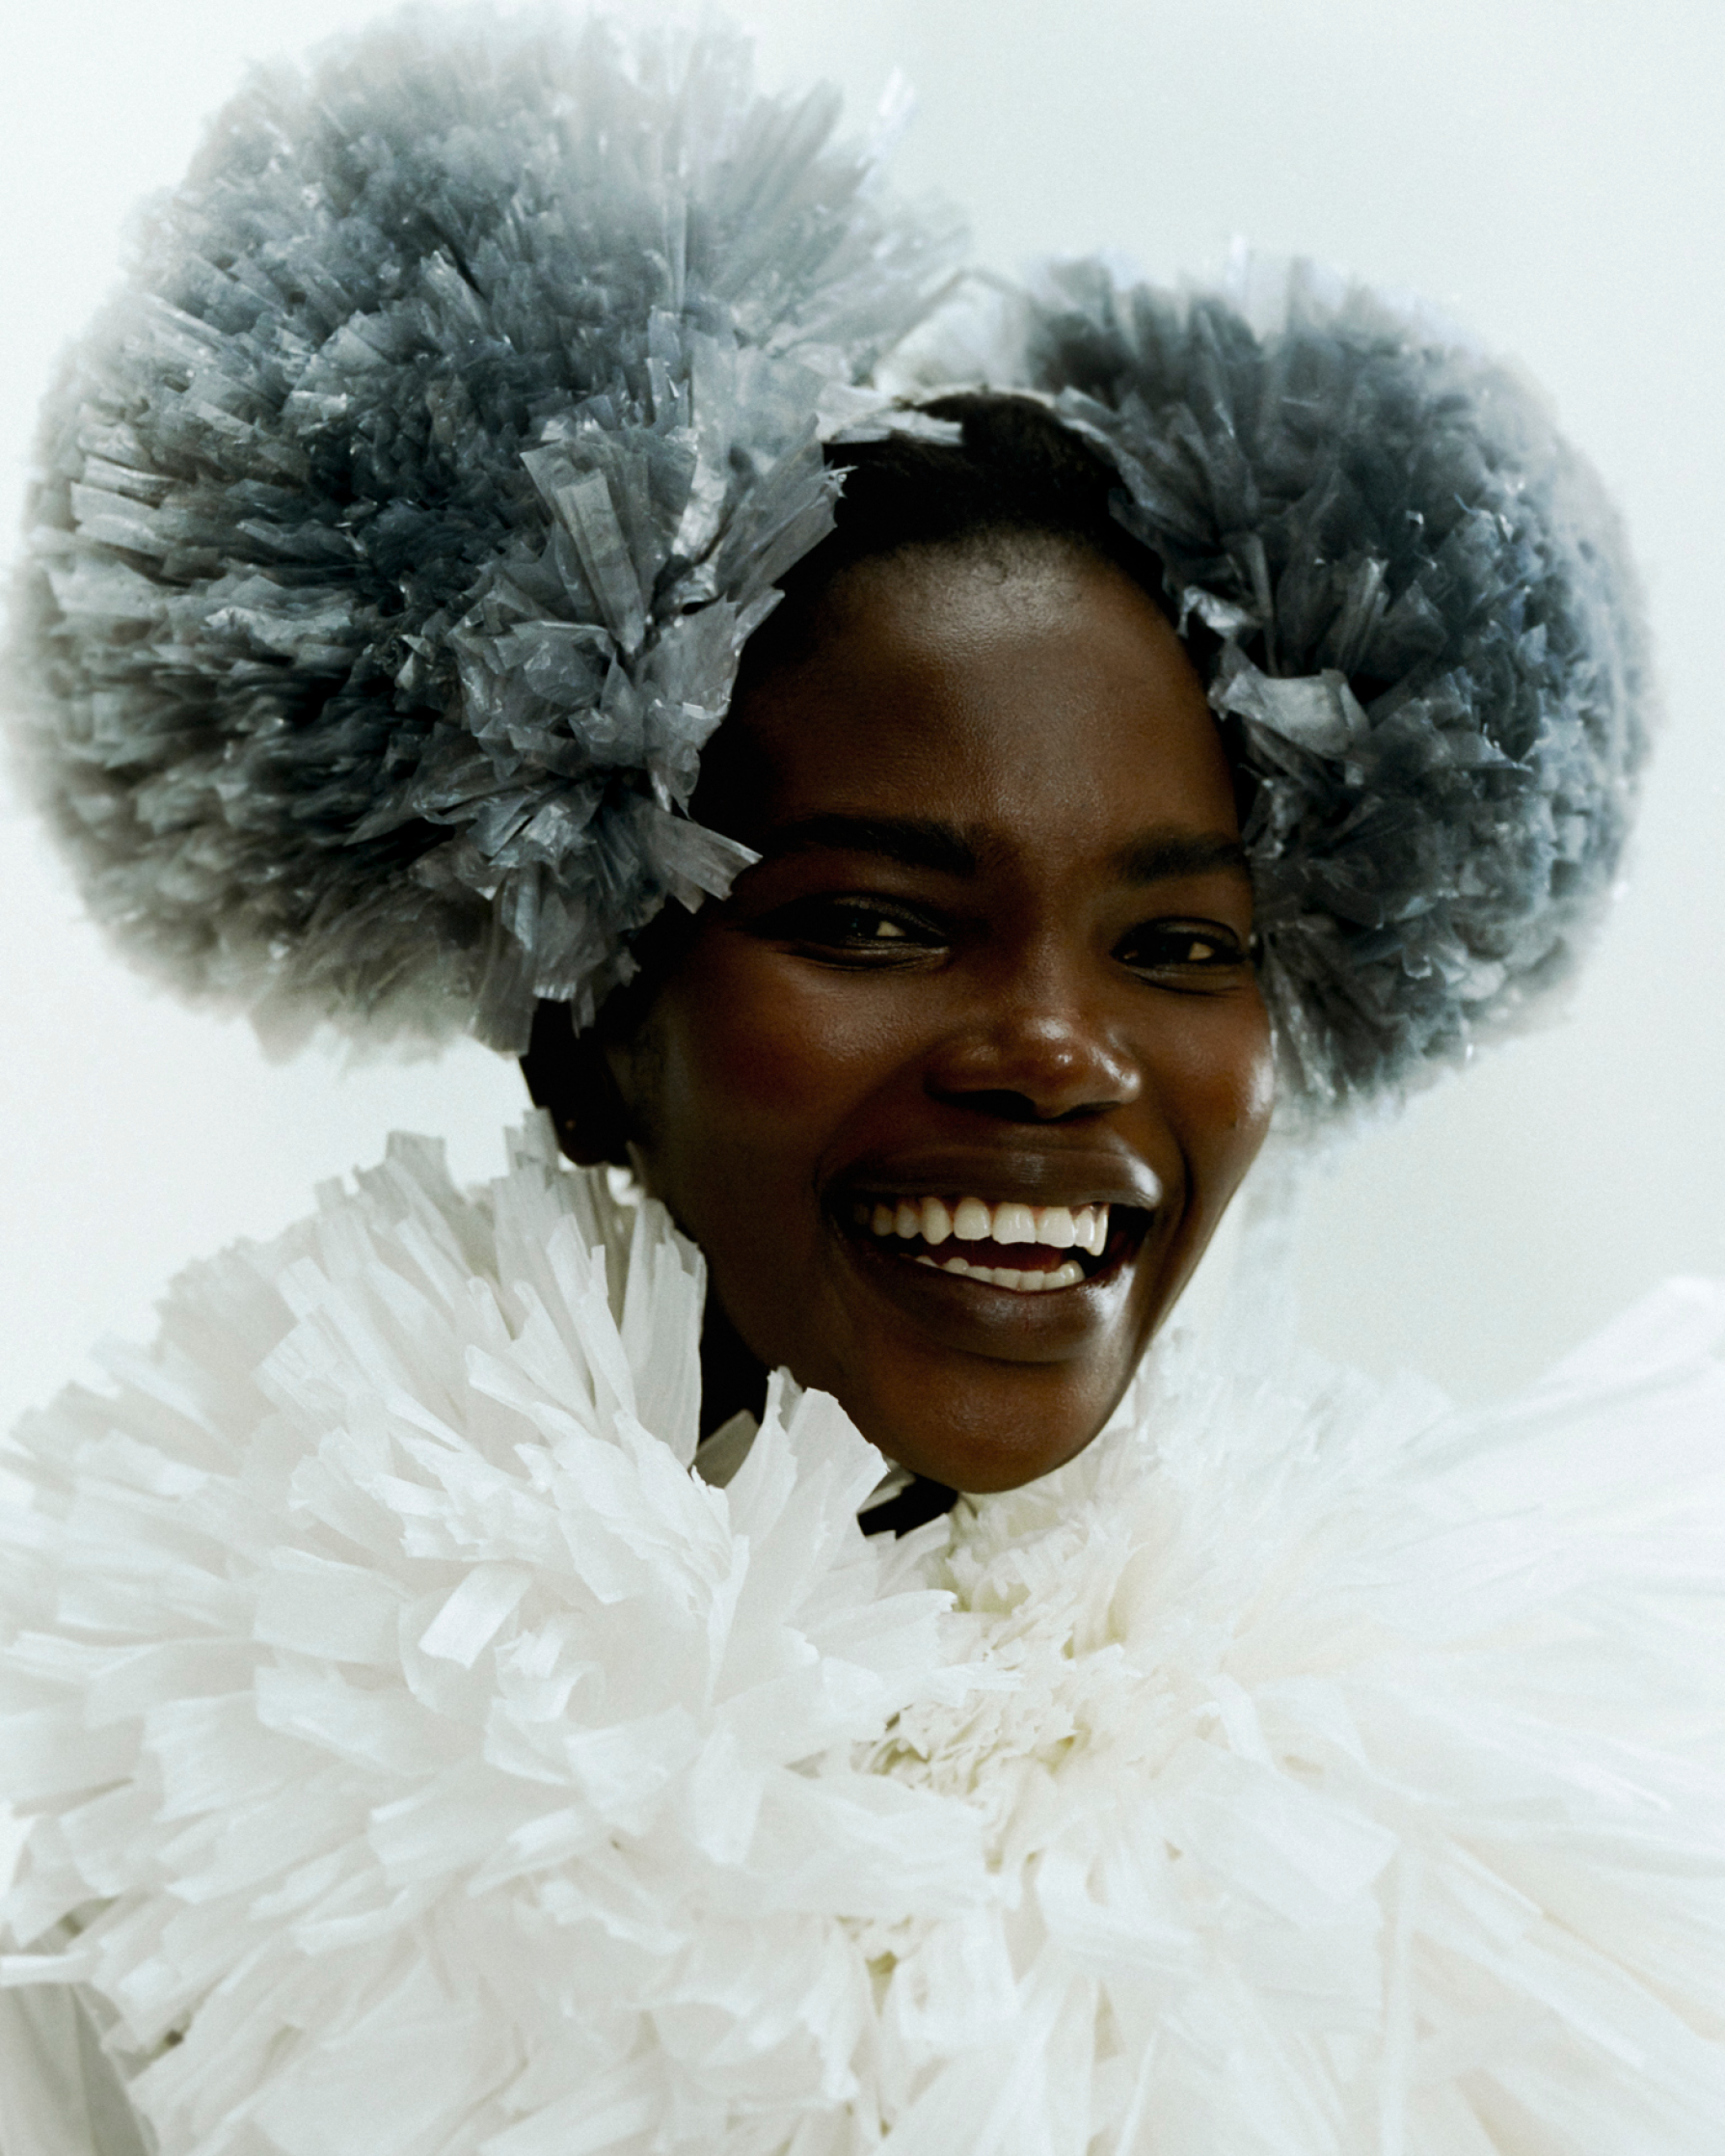 Finalists announced: LVMH Prize makes history with designers from Africa